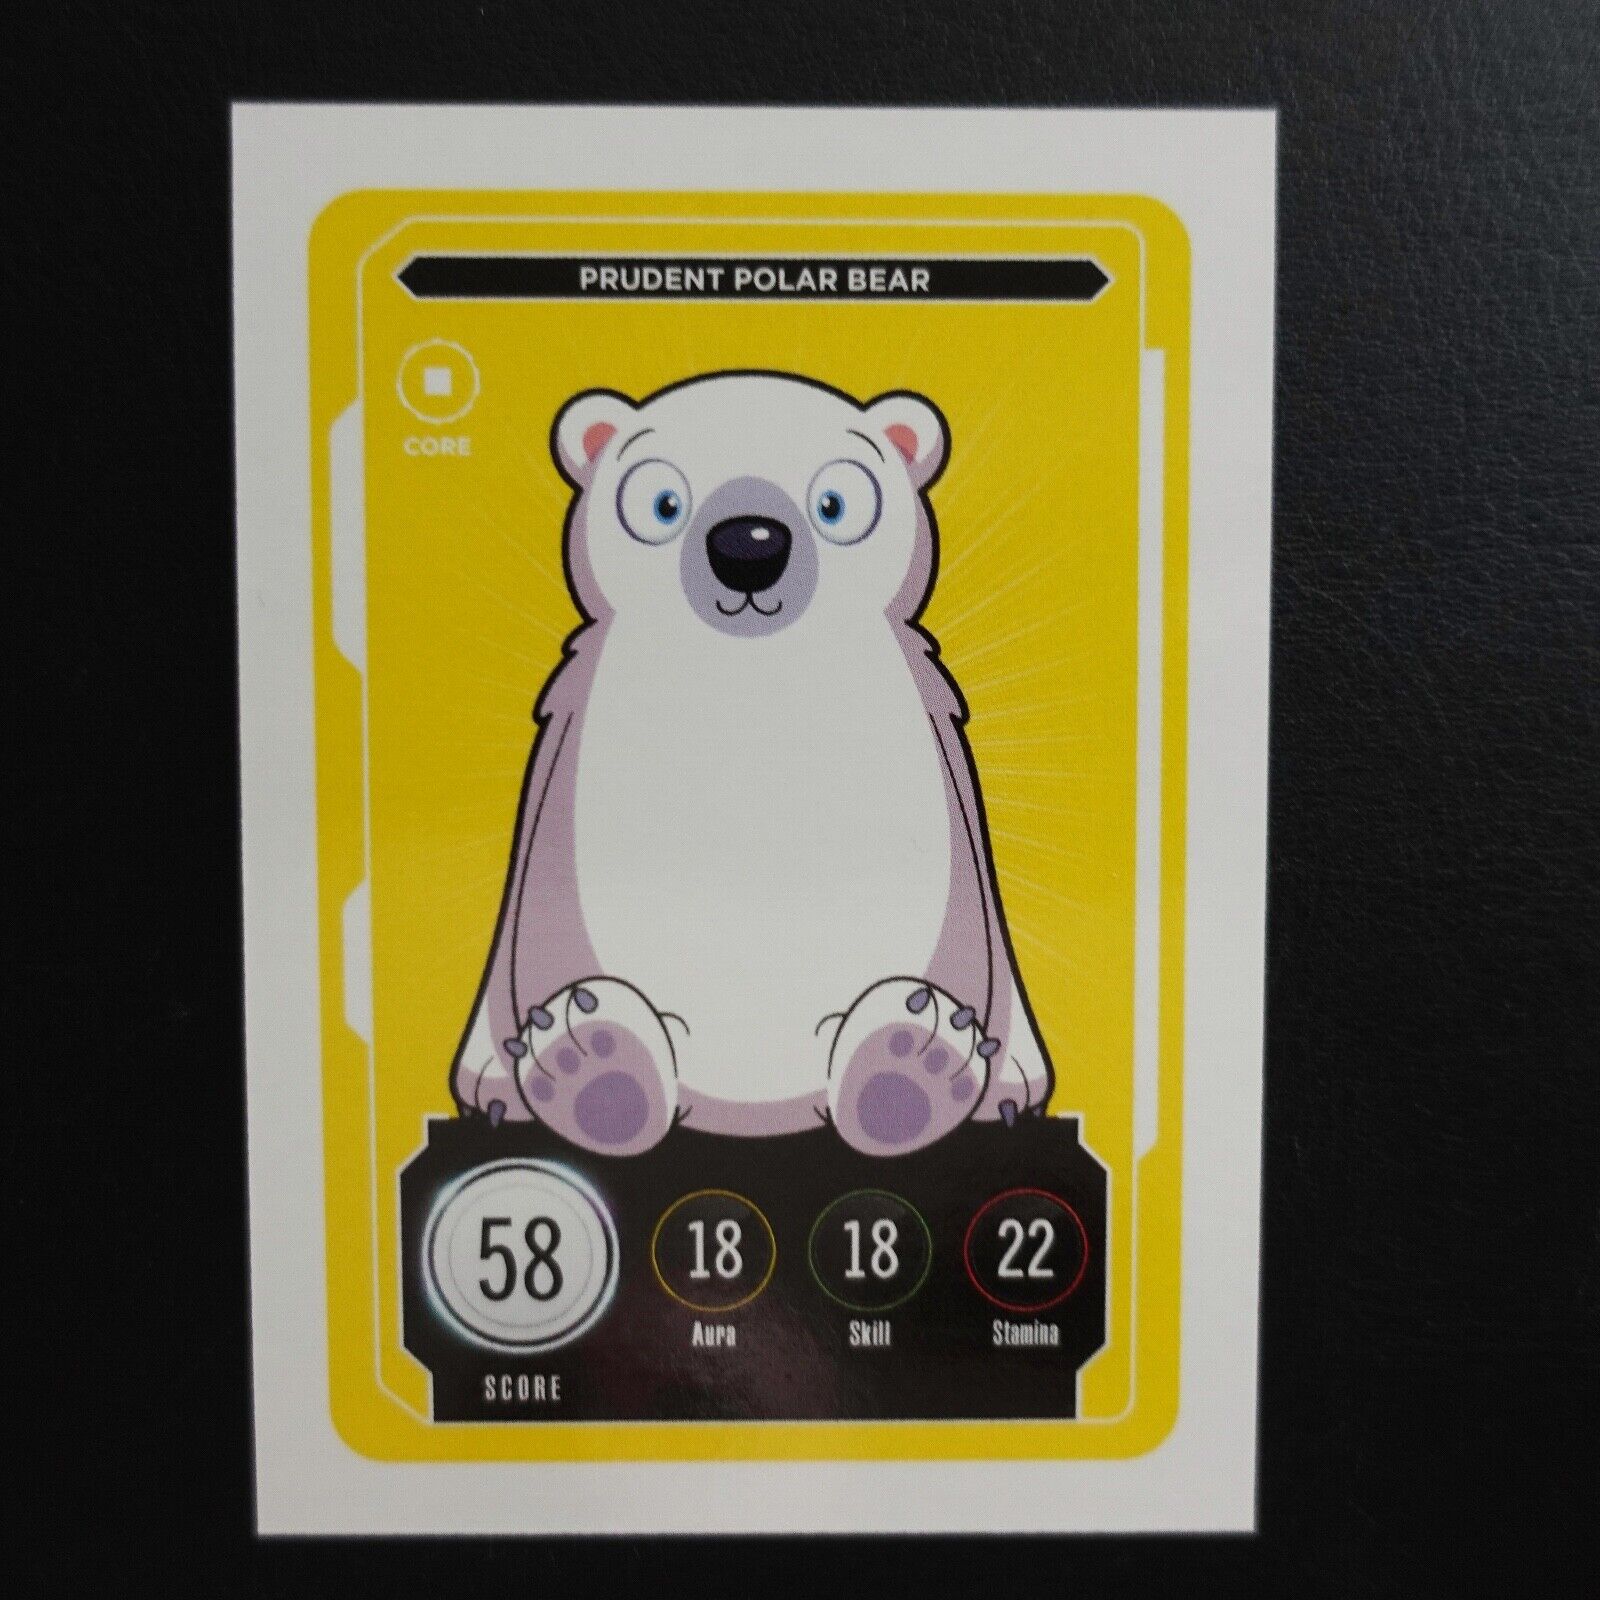 Prudent Polar Bear Veefriends Compete And Collect Series 2 Trading Card Gary Vee